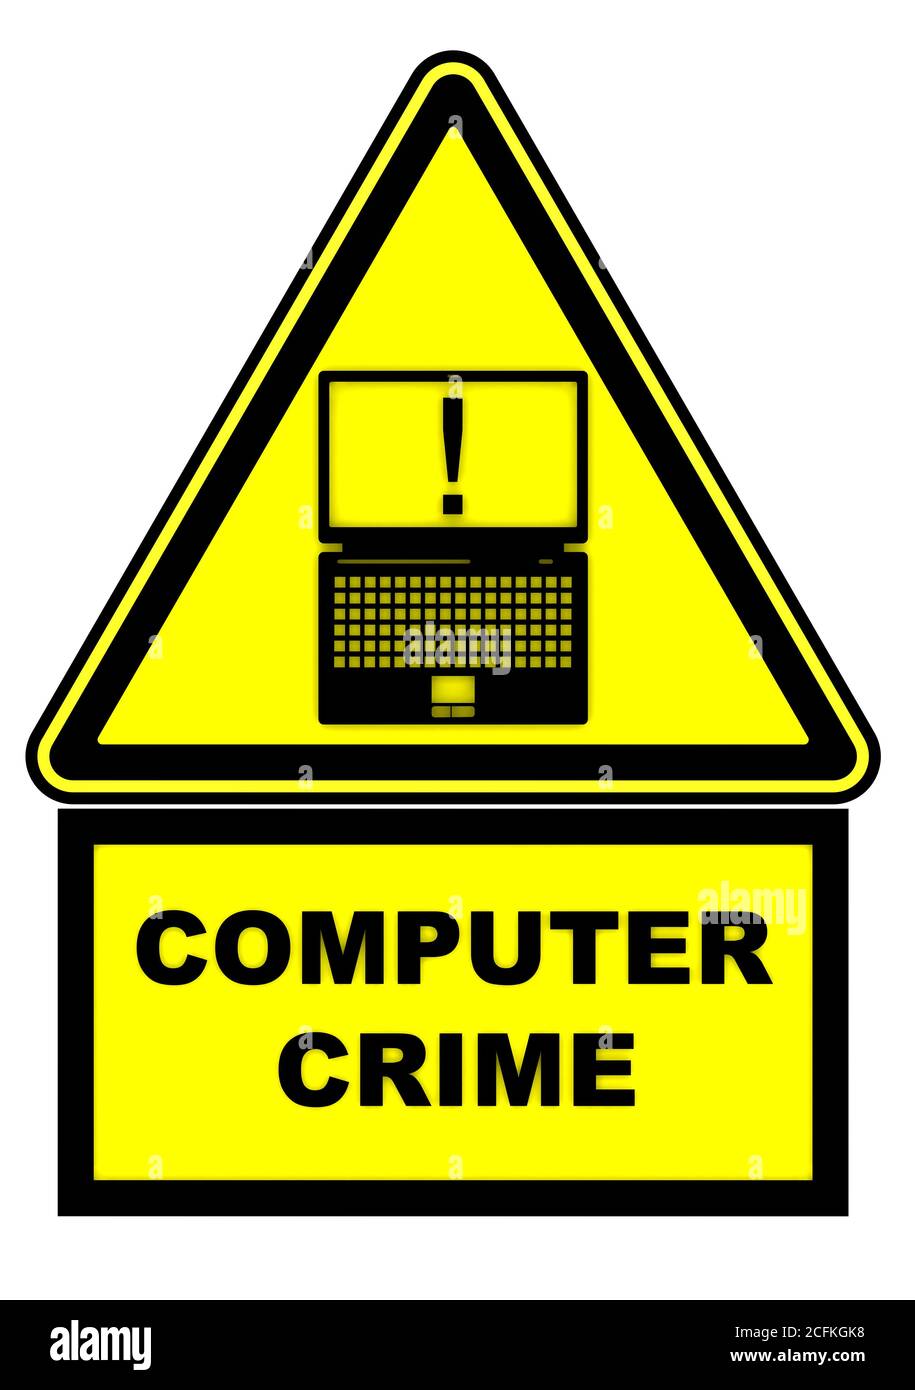 Computer crime. Warning sign with a notebook image and text COMPUTER CRIME. 3D Illustration Stock Photo